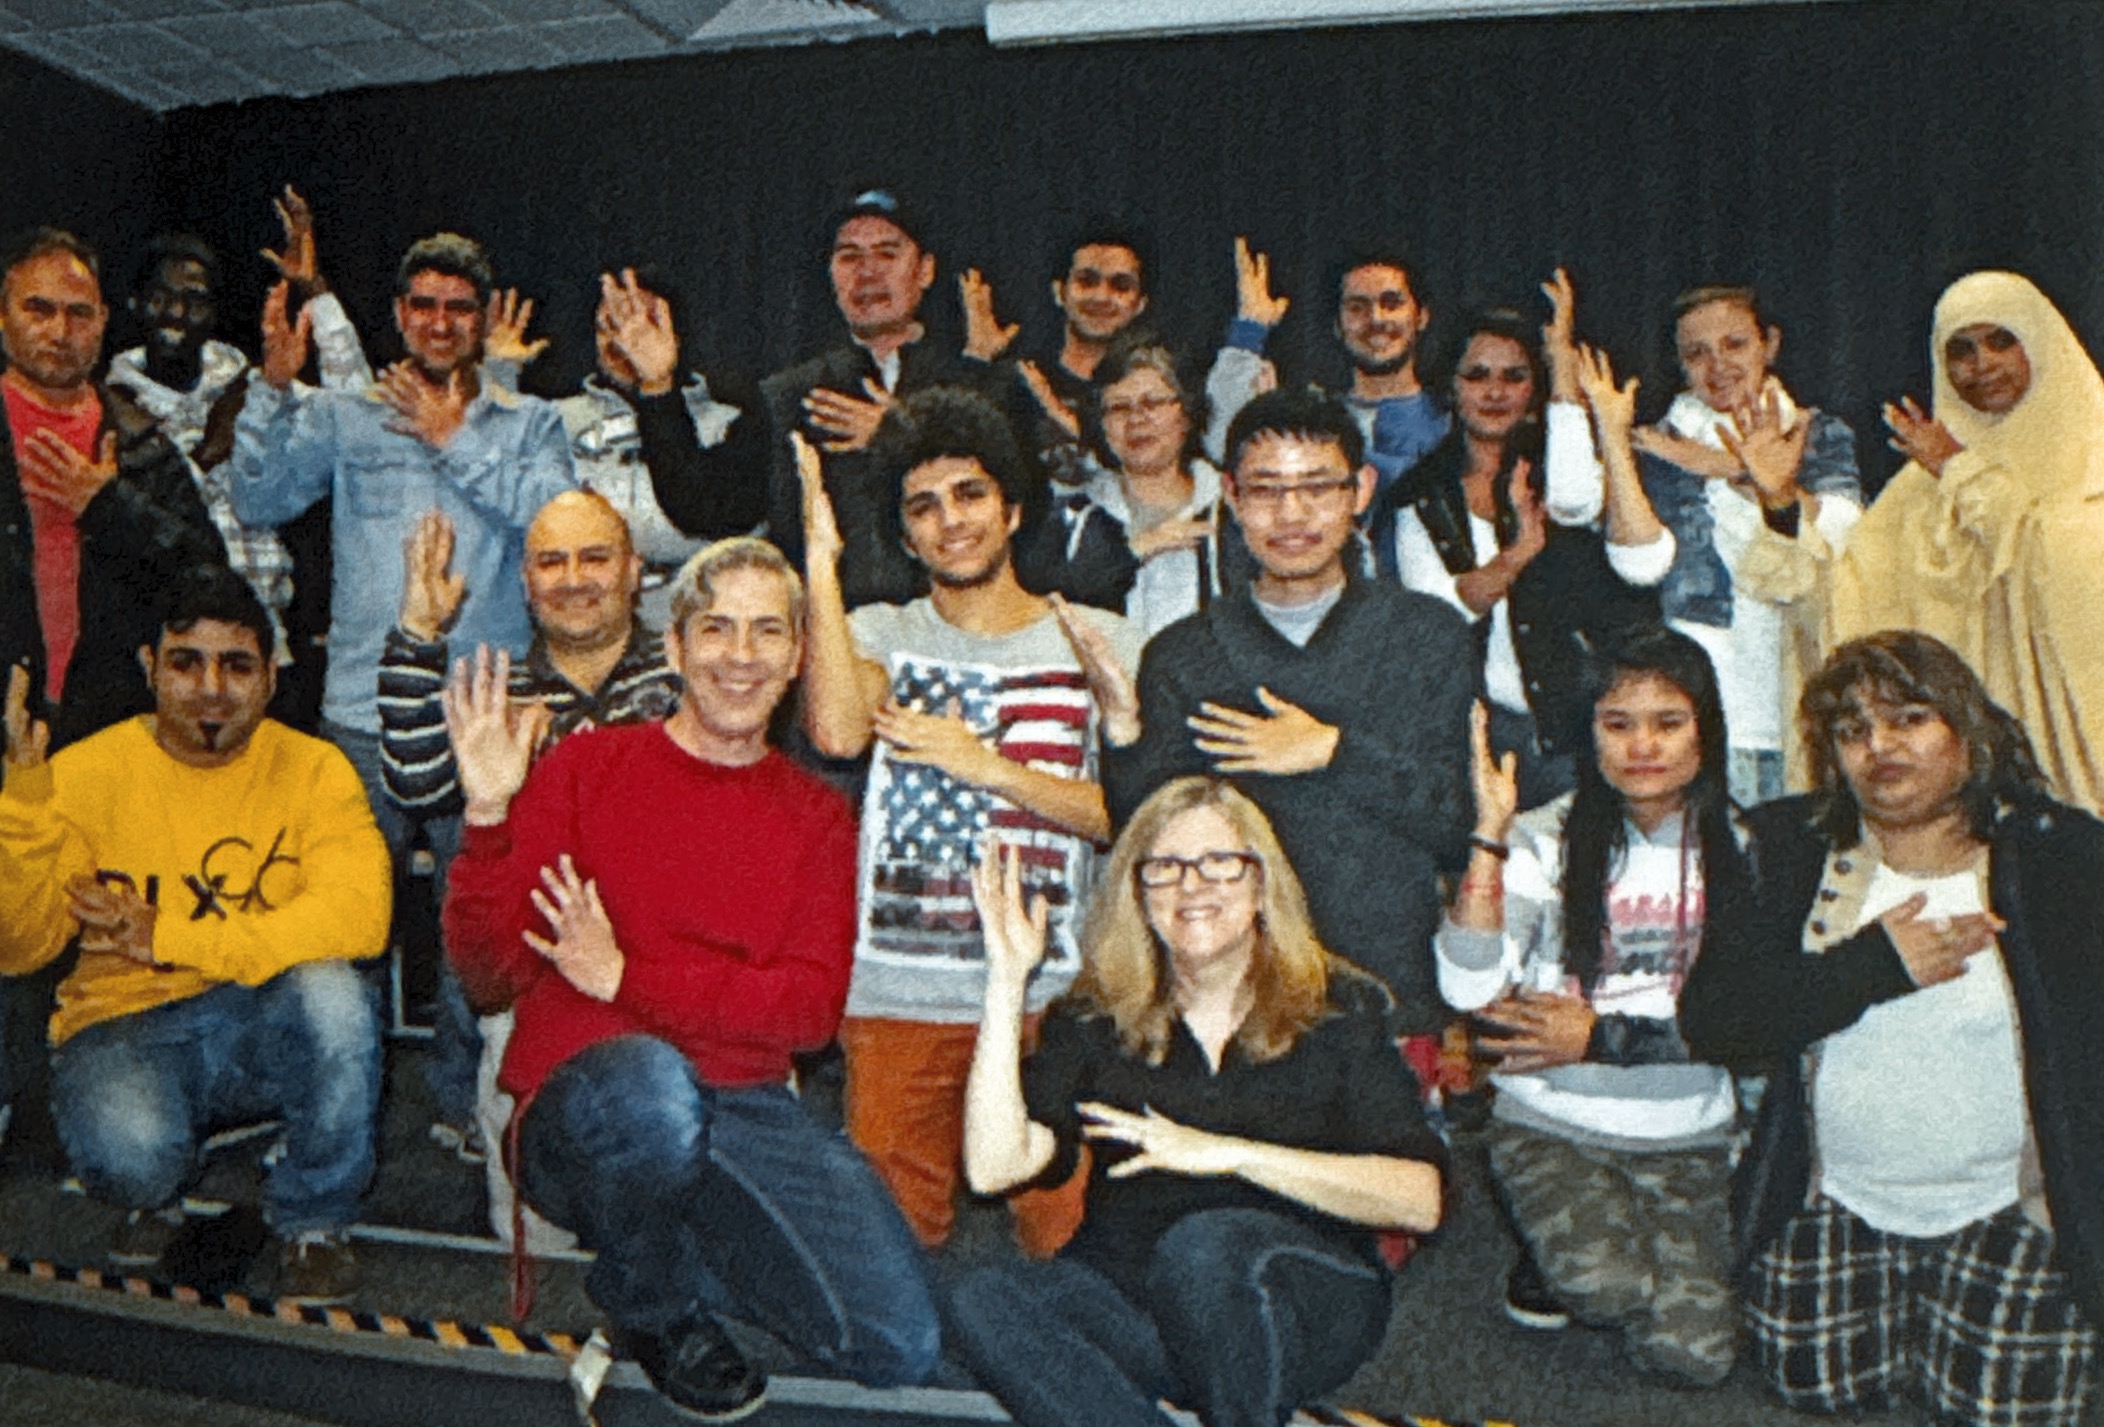 Auslan for Deaf Migrants participants in Vicdeaf Annual Report 2013-14